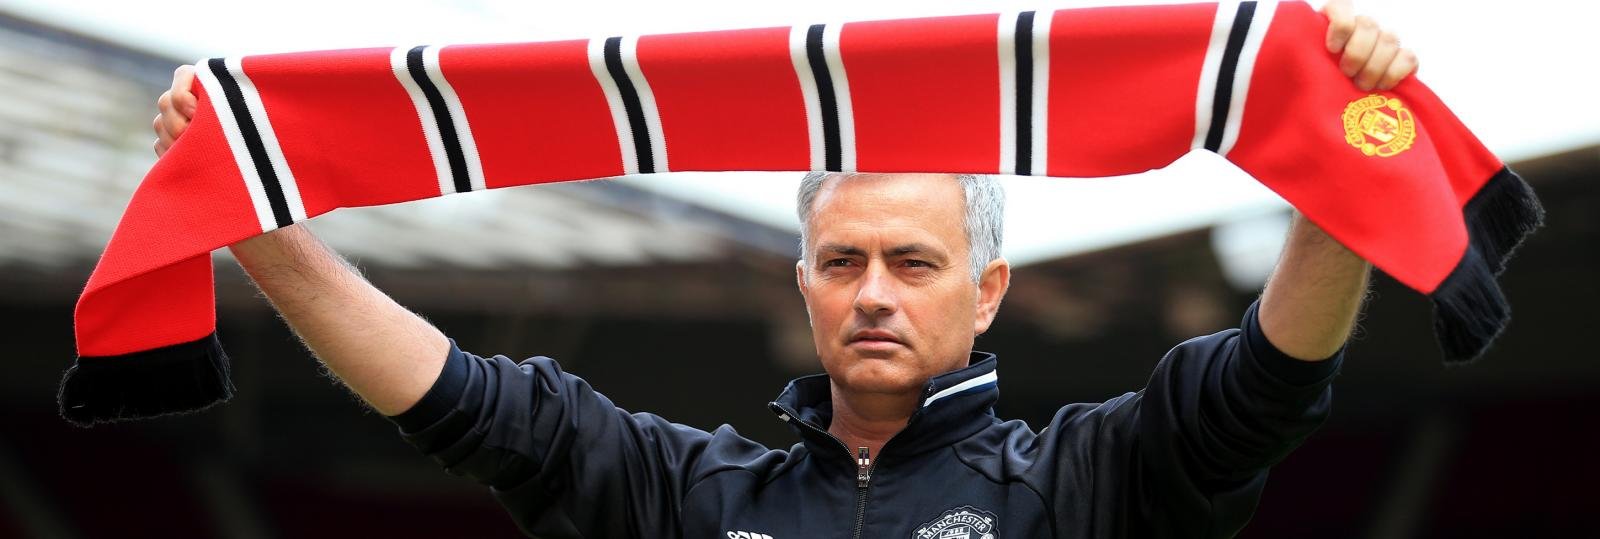 Manchester United ahead of Manchester City in £30m race for 19-year-old forward